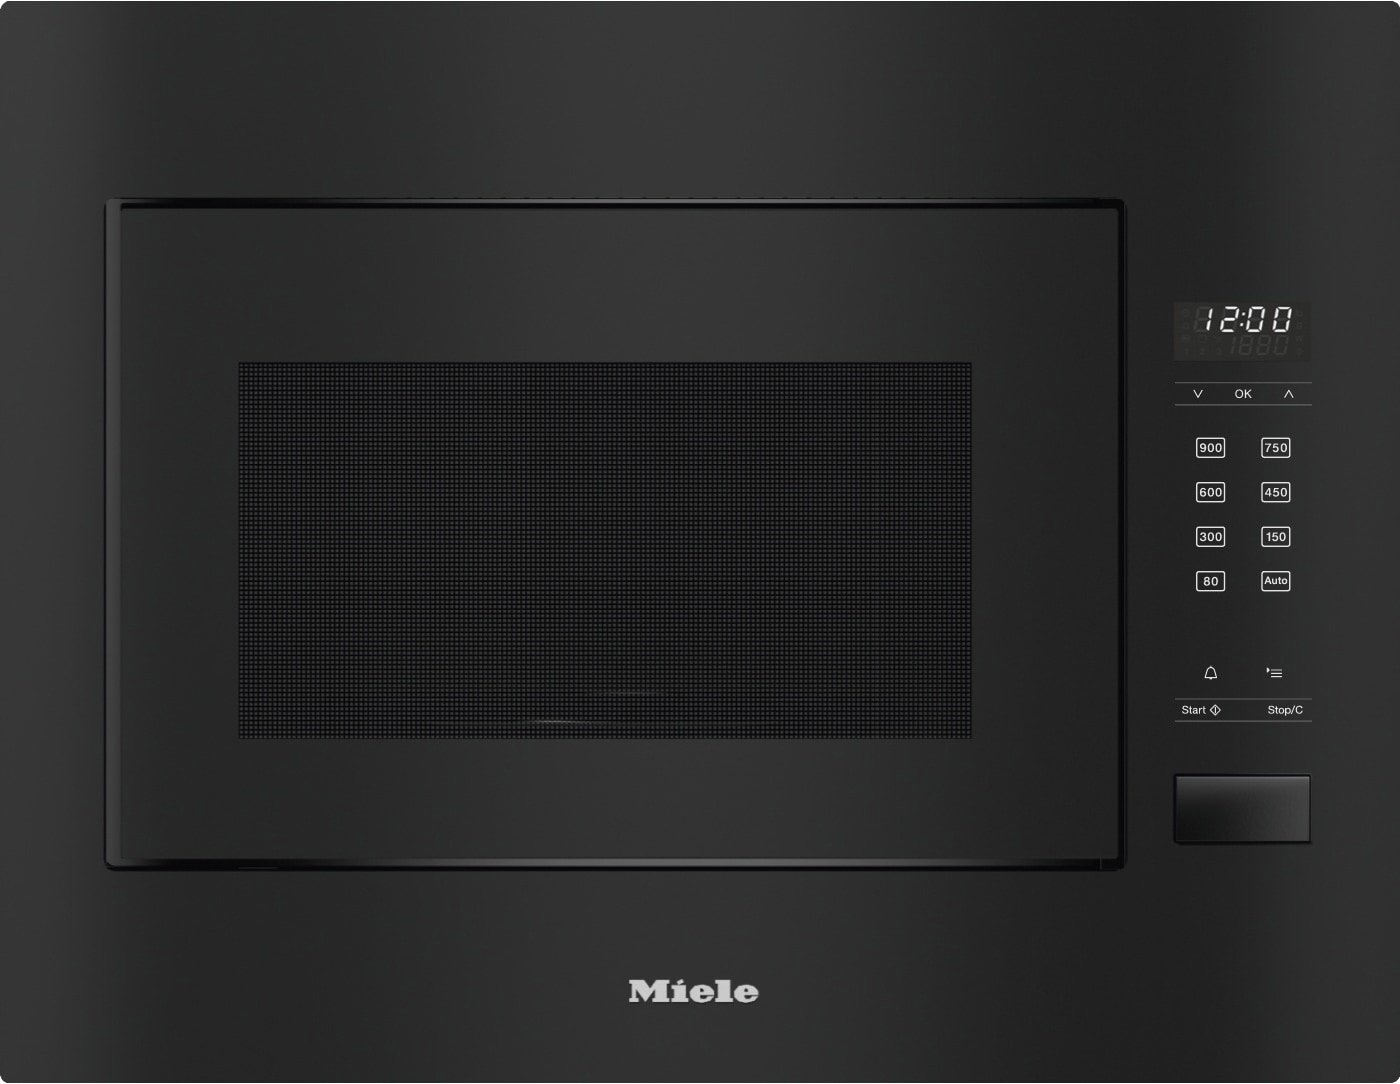 4: Miele mikroovn  M2240OBSW integreret